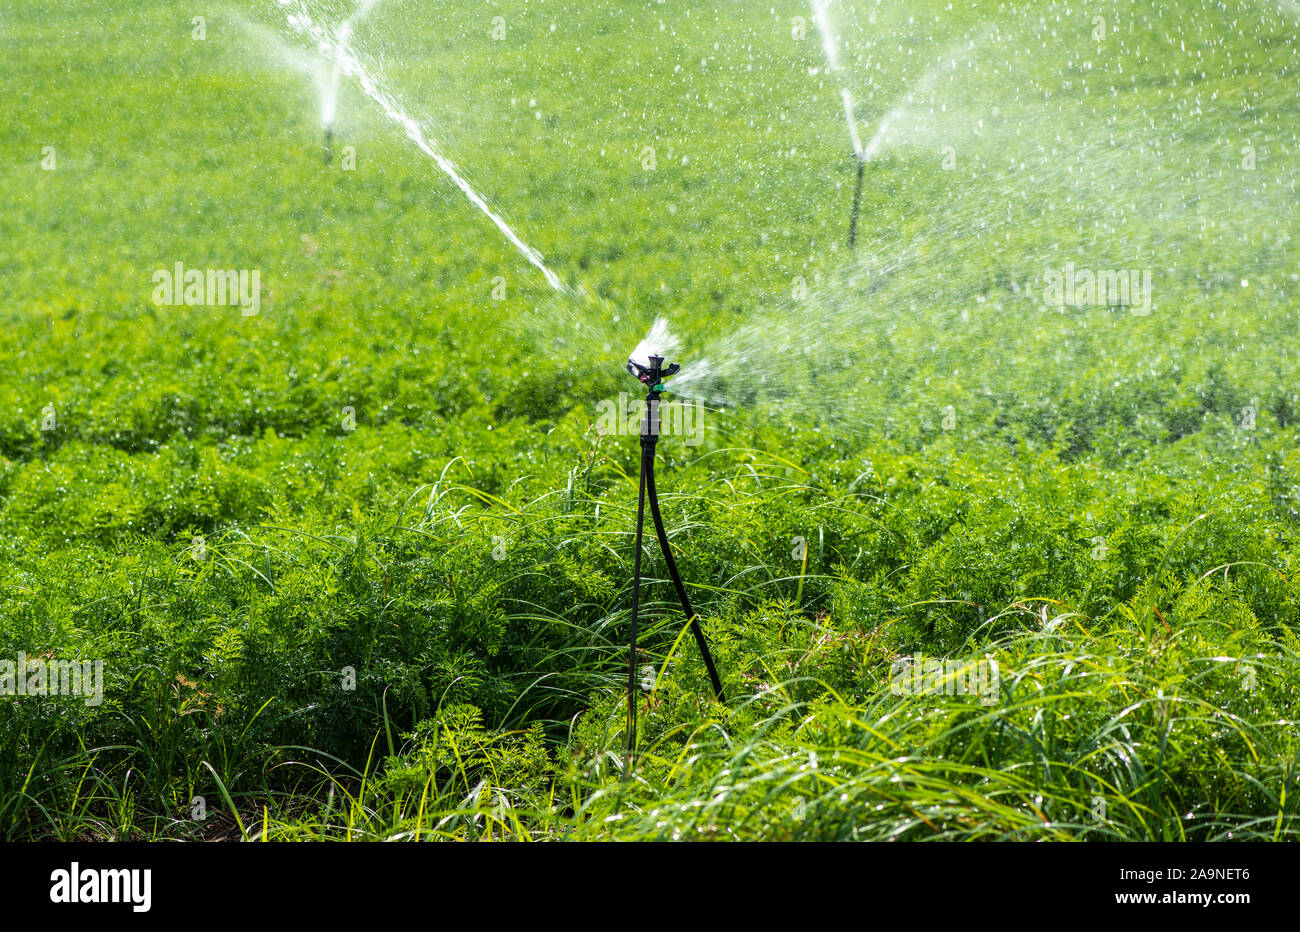 Watering plantation with carrots. Irrigation sprinklers in big carrots farm. Blue sky. Stock Photo